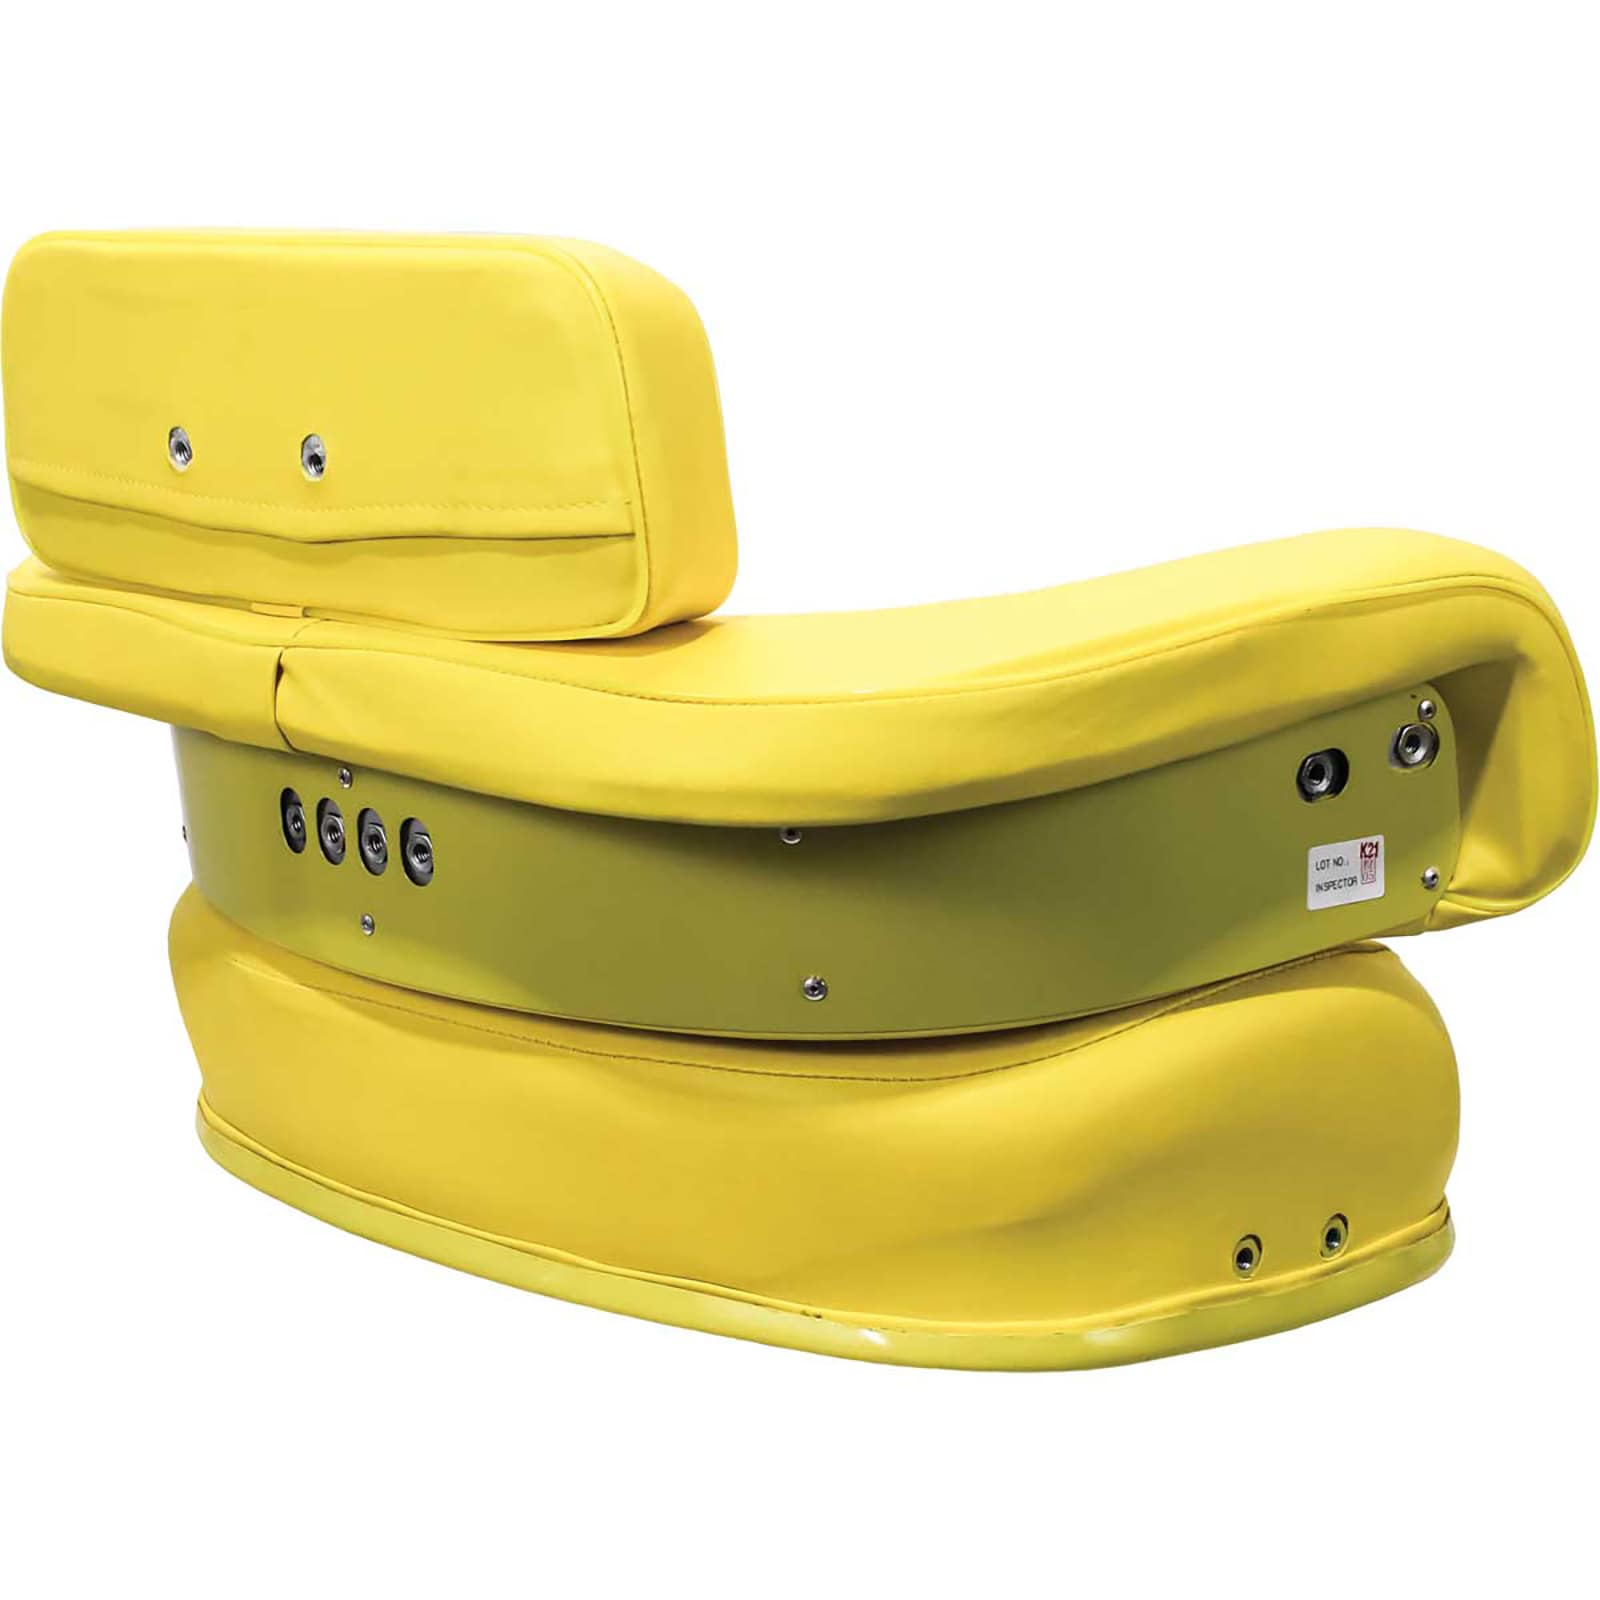 5000SCKIT Yellow Seat Cushion Kit for RE62227 Seat Made for John Deere